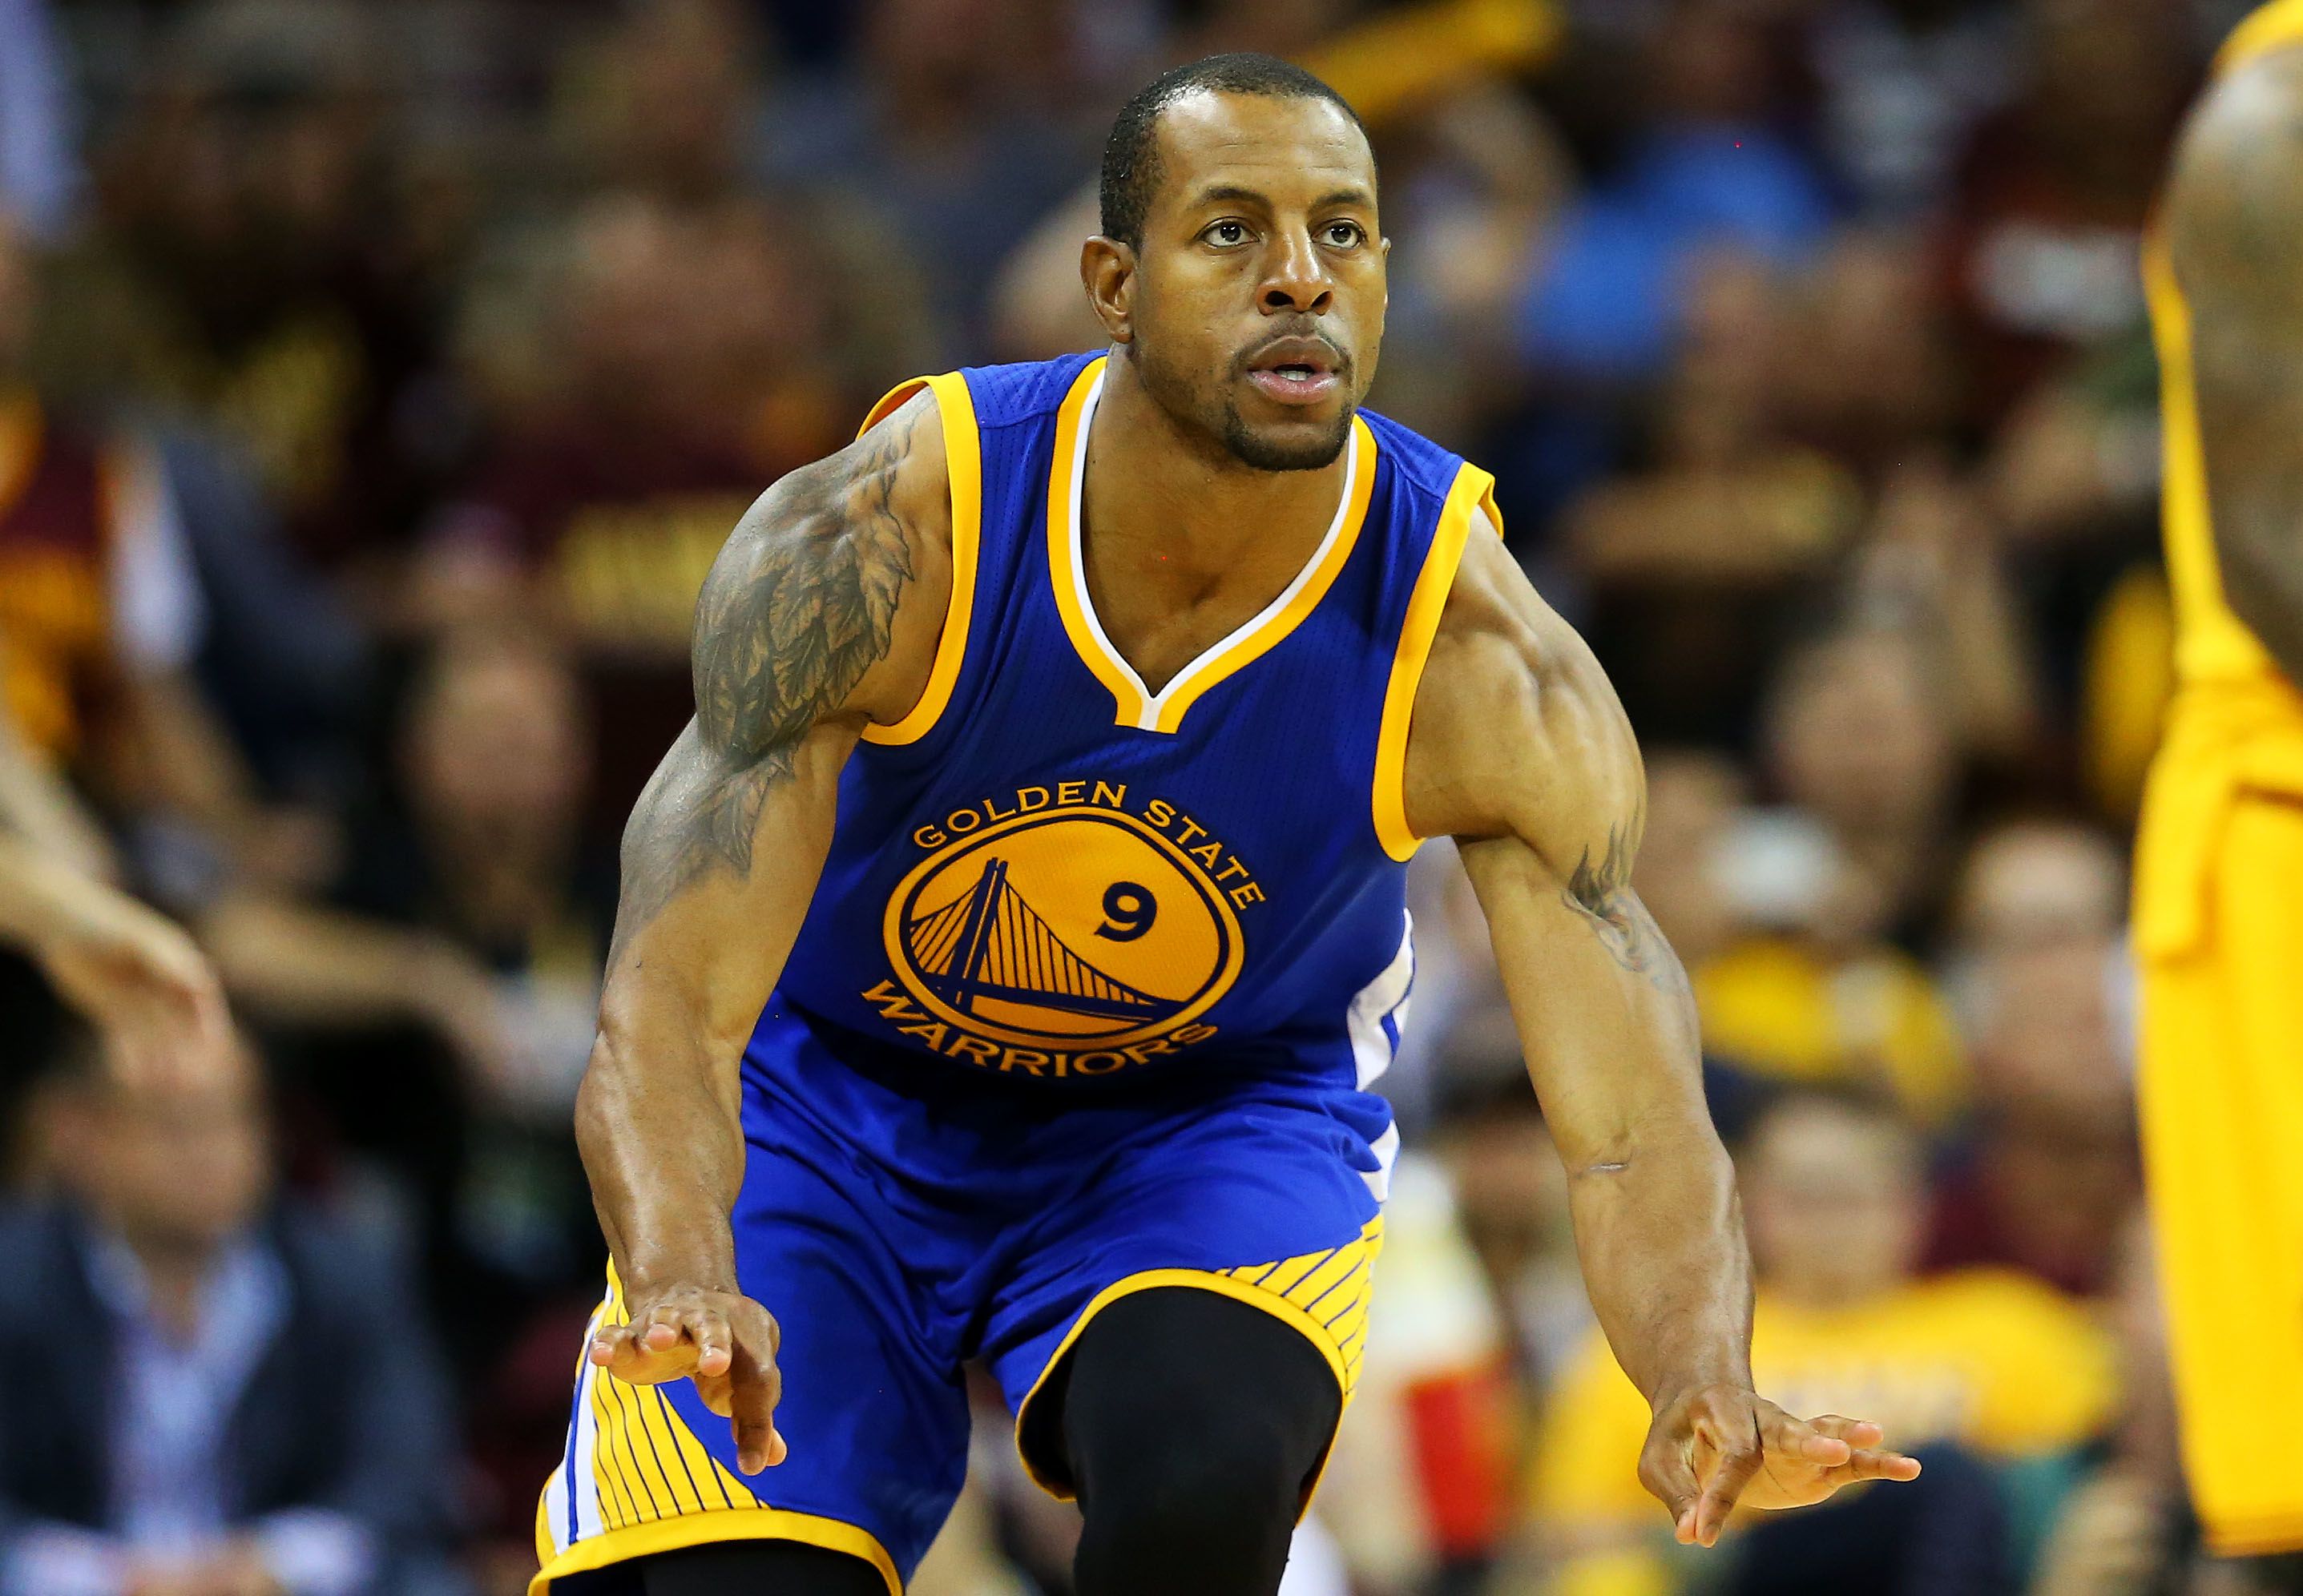 NBA Champion and Successful Entrepreneur Andre Iguodala Added to